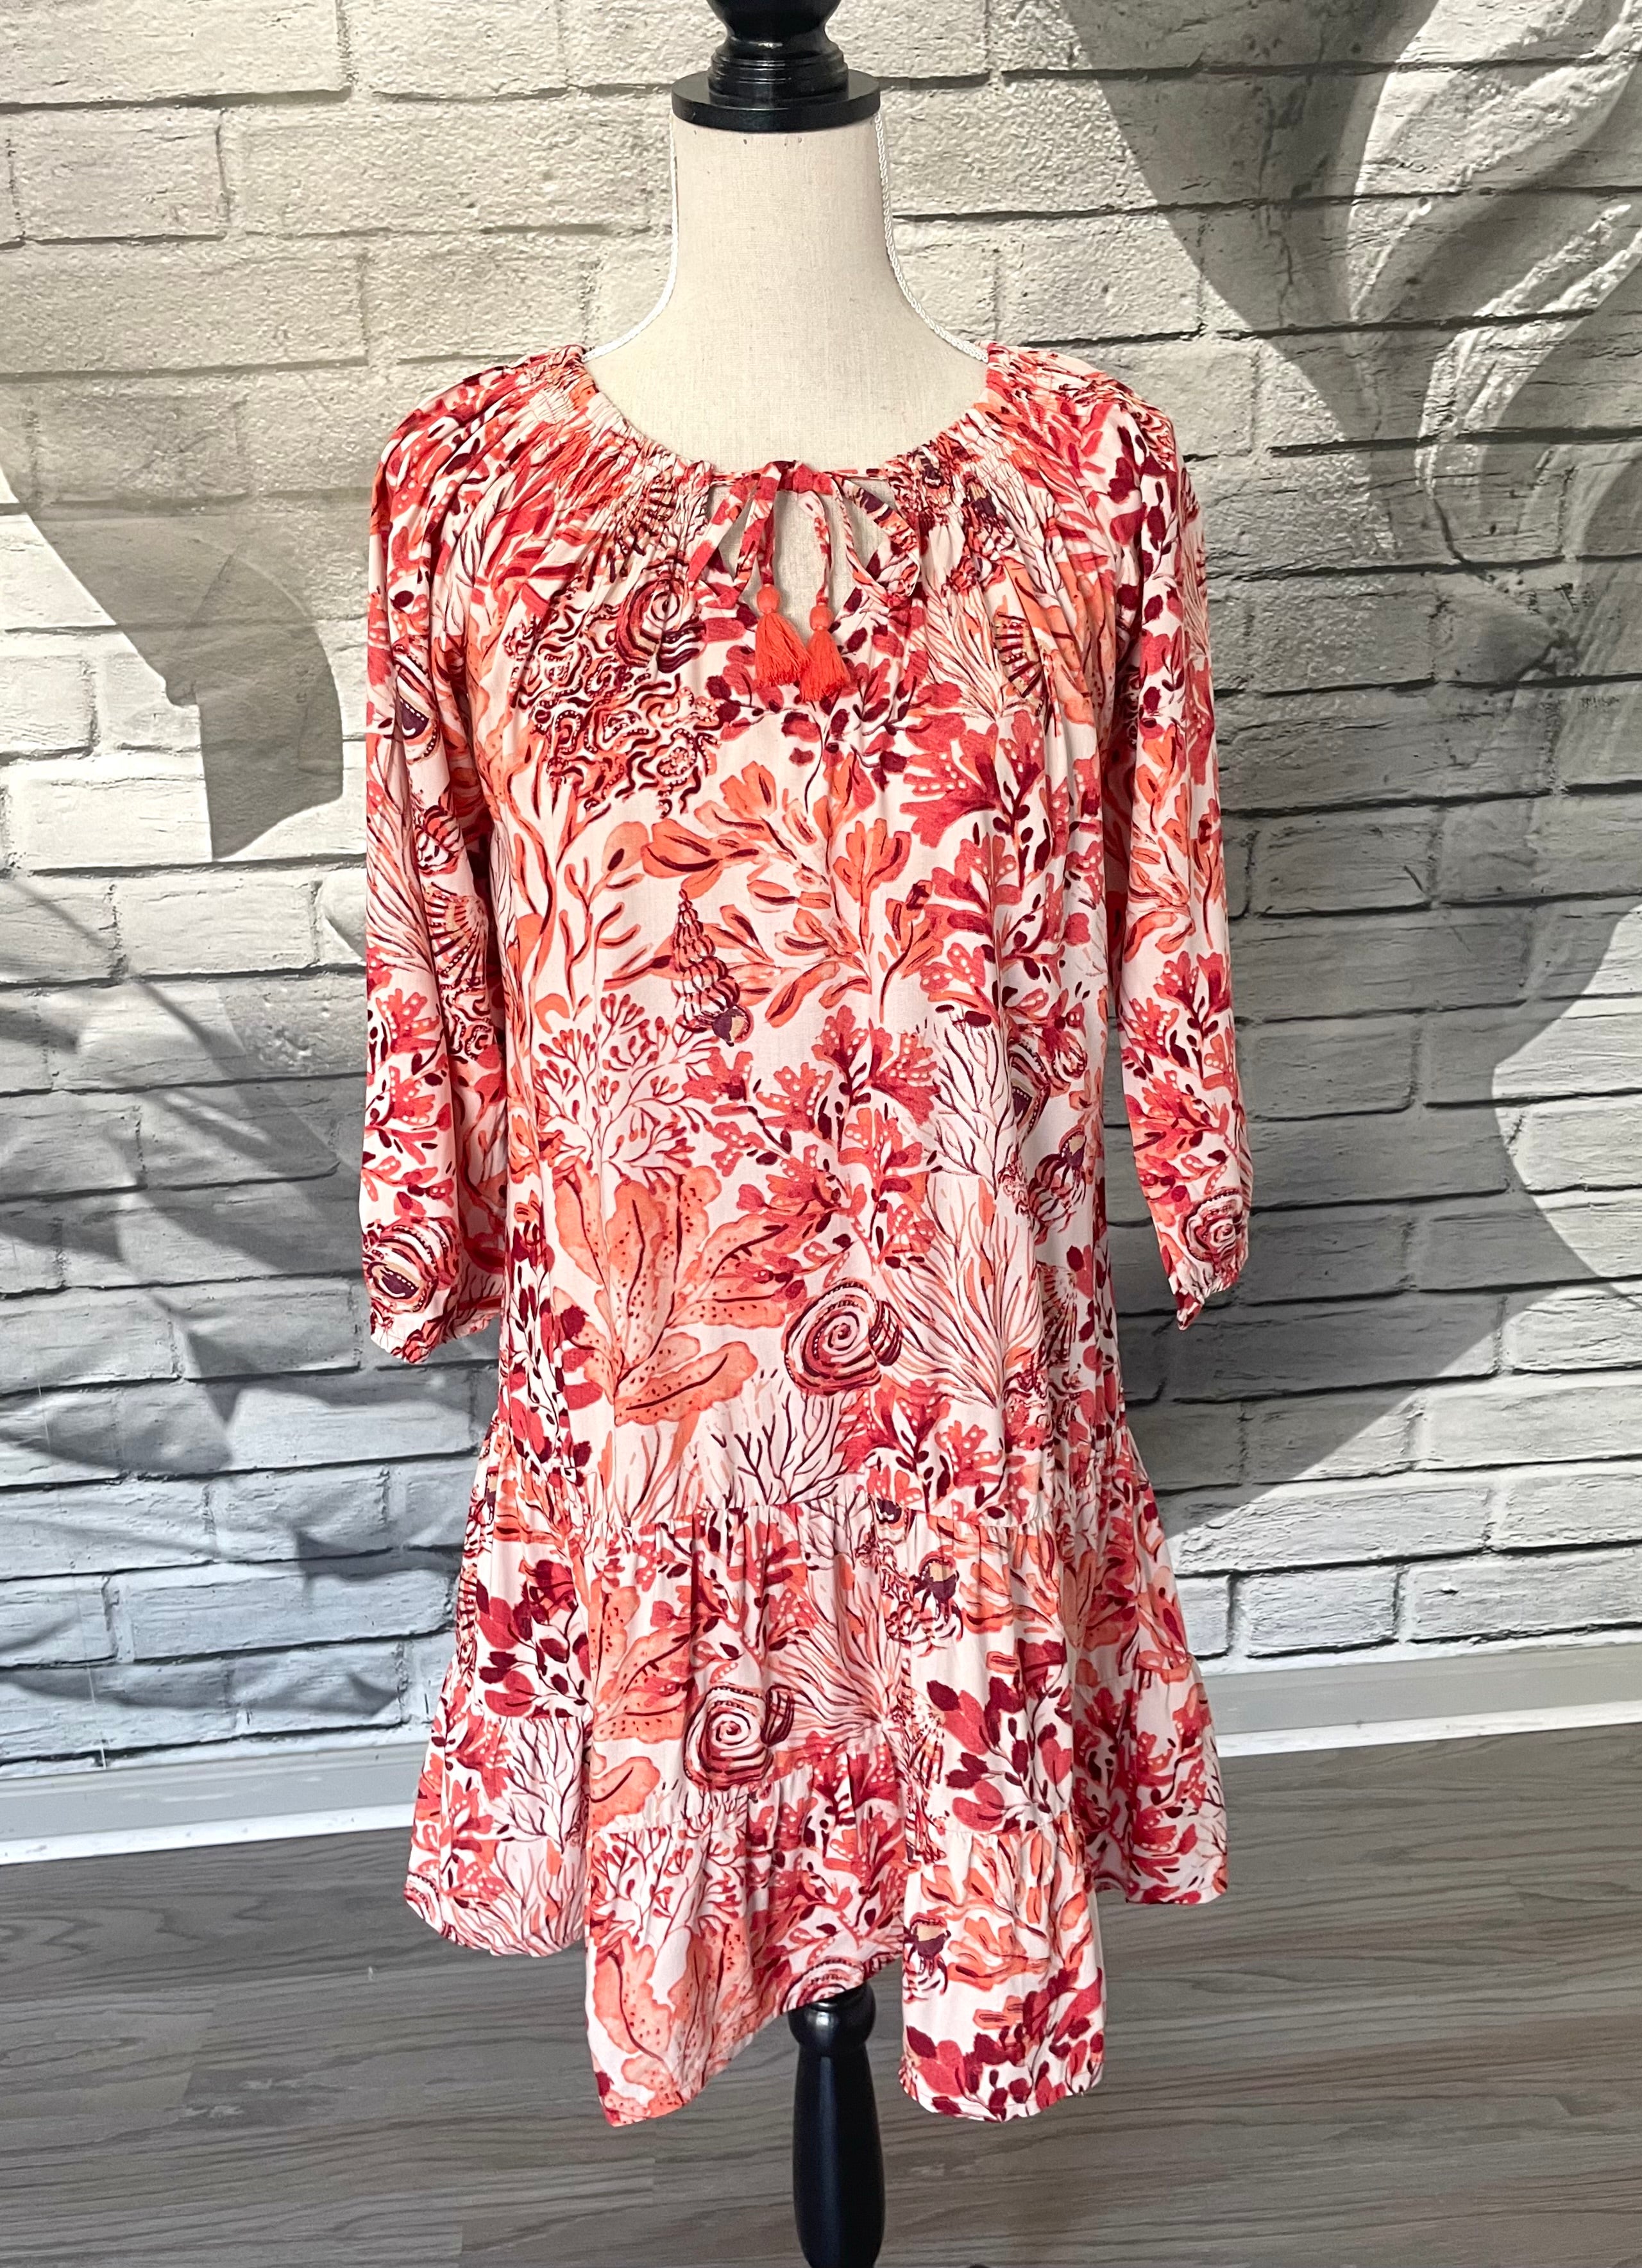 Emily Dress in Coral Reef